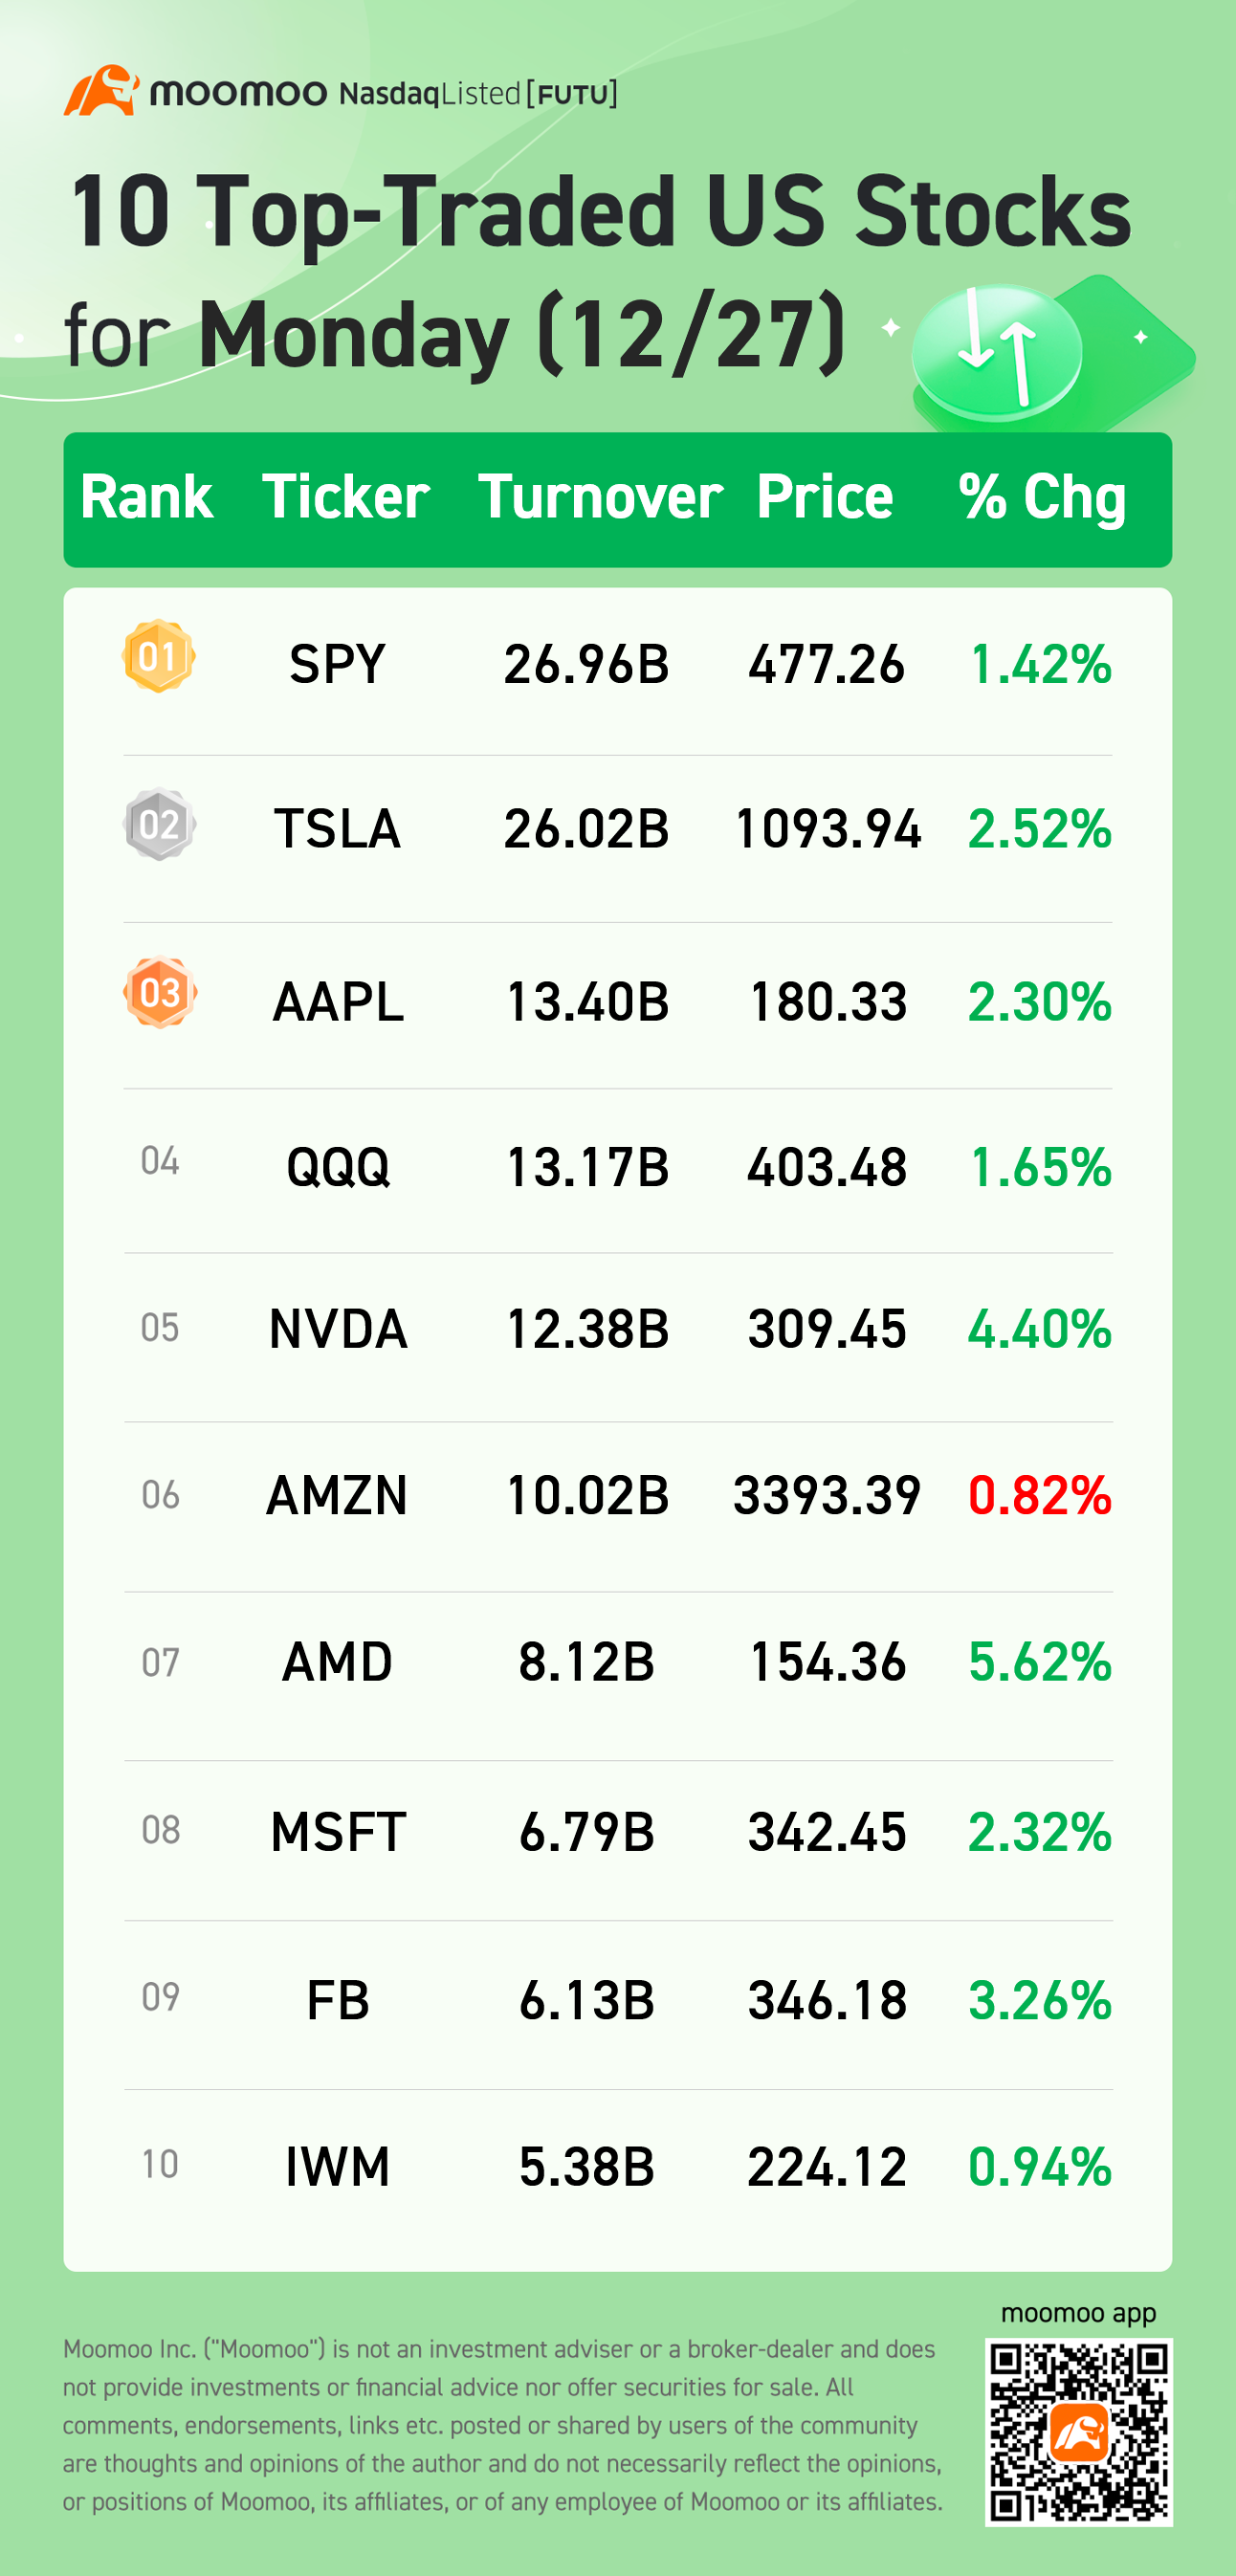 10 Top-Traded US Stocks for Monday (12/27)